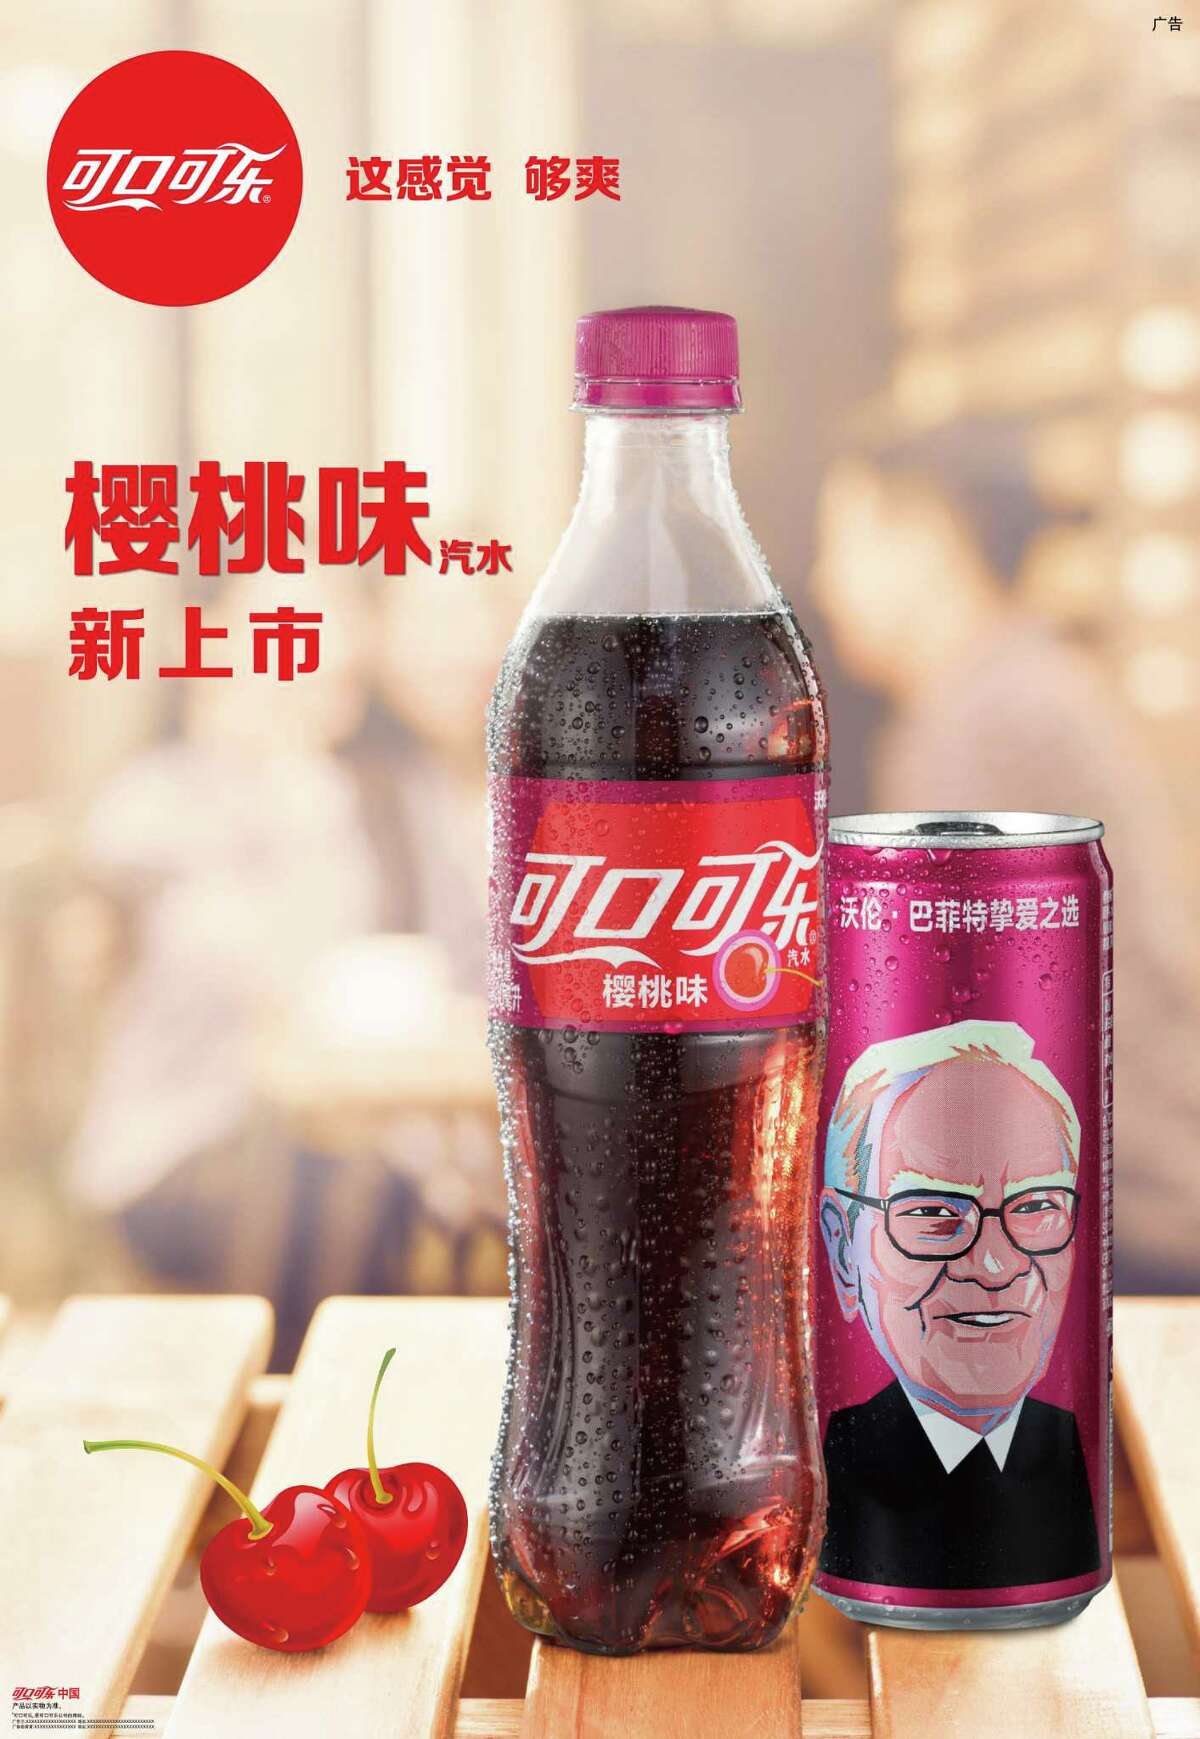 Shown is an ad for Coke products, including a can of Cherry Coke with a likeness of billionaire investor Warren Buffett, for the Chinese market.